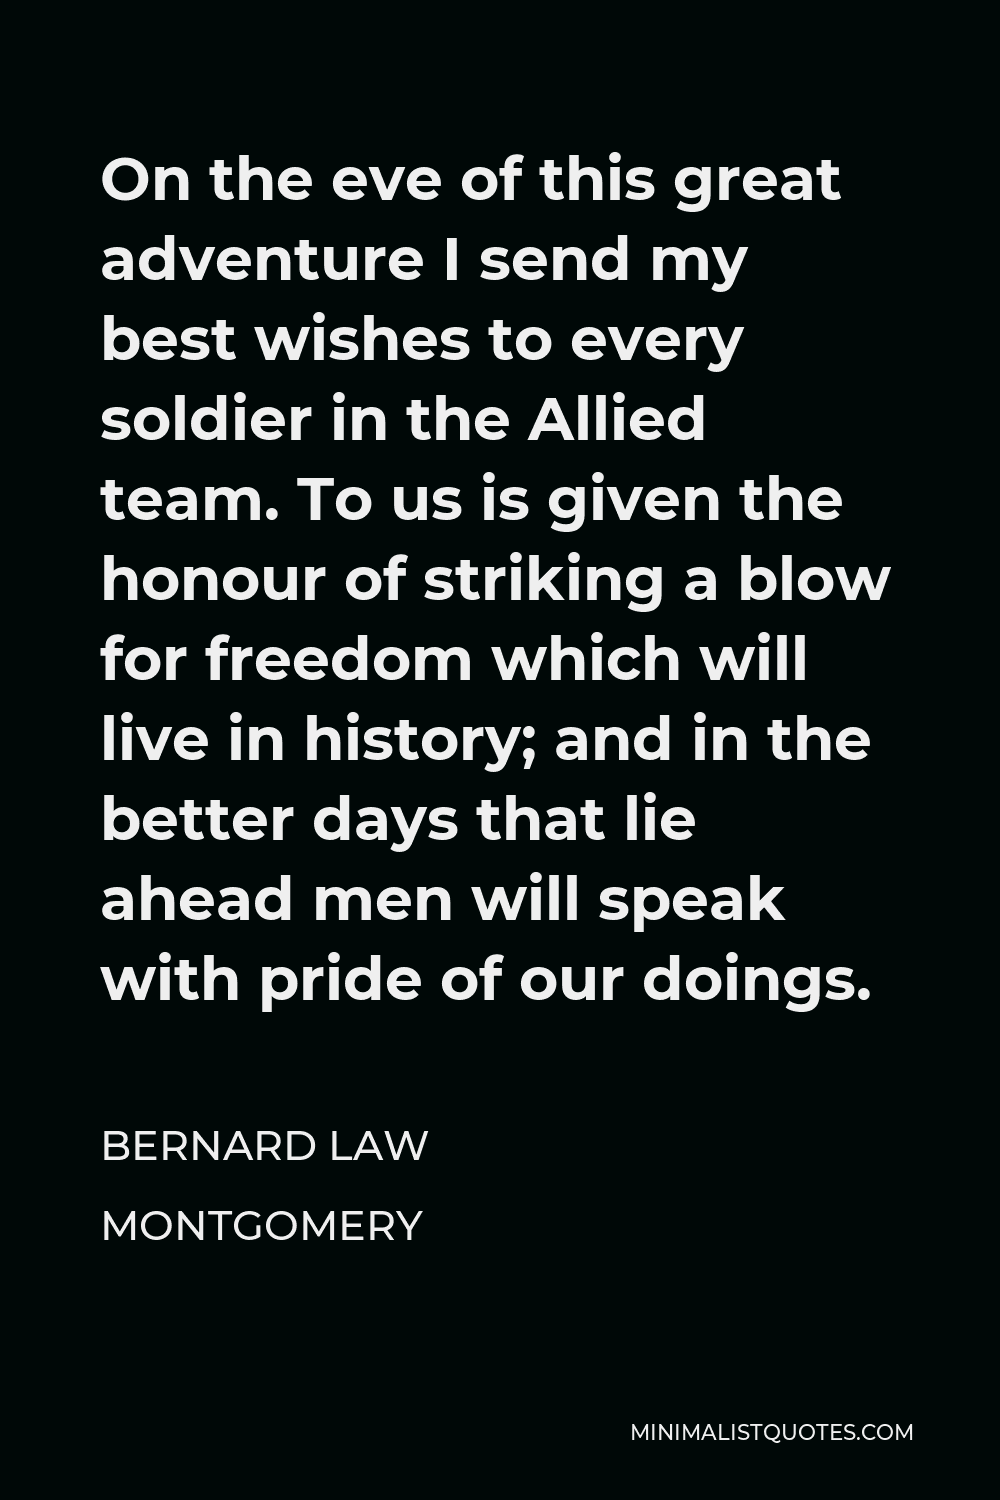 Bernard Law Montgomery Quote - On the eve of this great adventure I send my best wishes to every soldier in the Allied team. To us is given the honour of striking a blow for freedom which will live in history; and in the better days that lie ahead men will speak with pride of our doings.